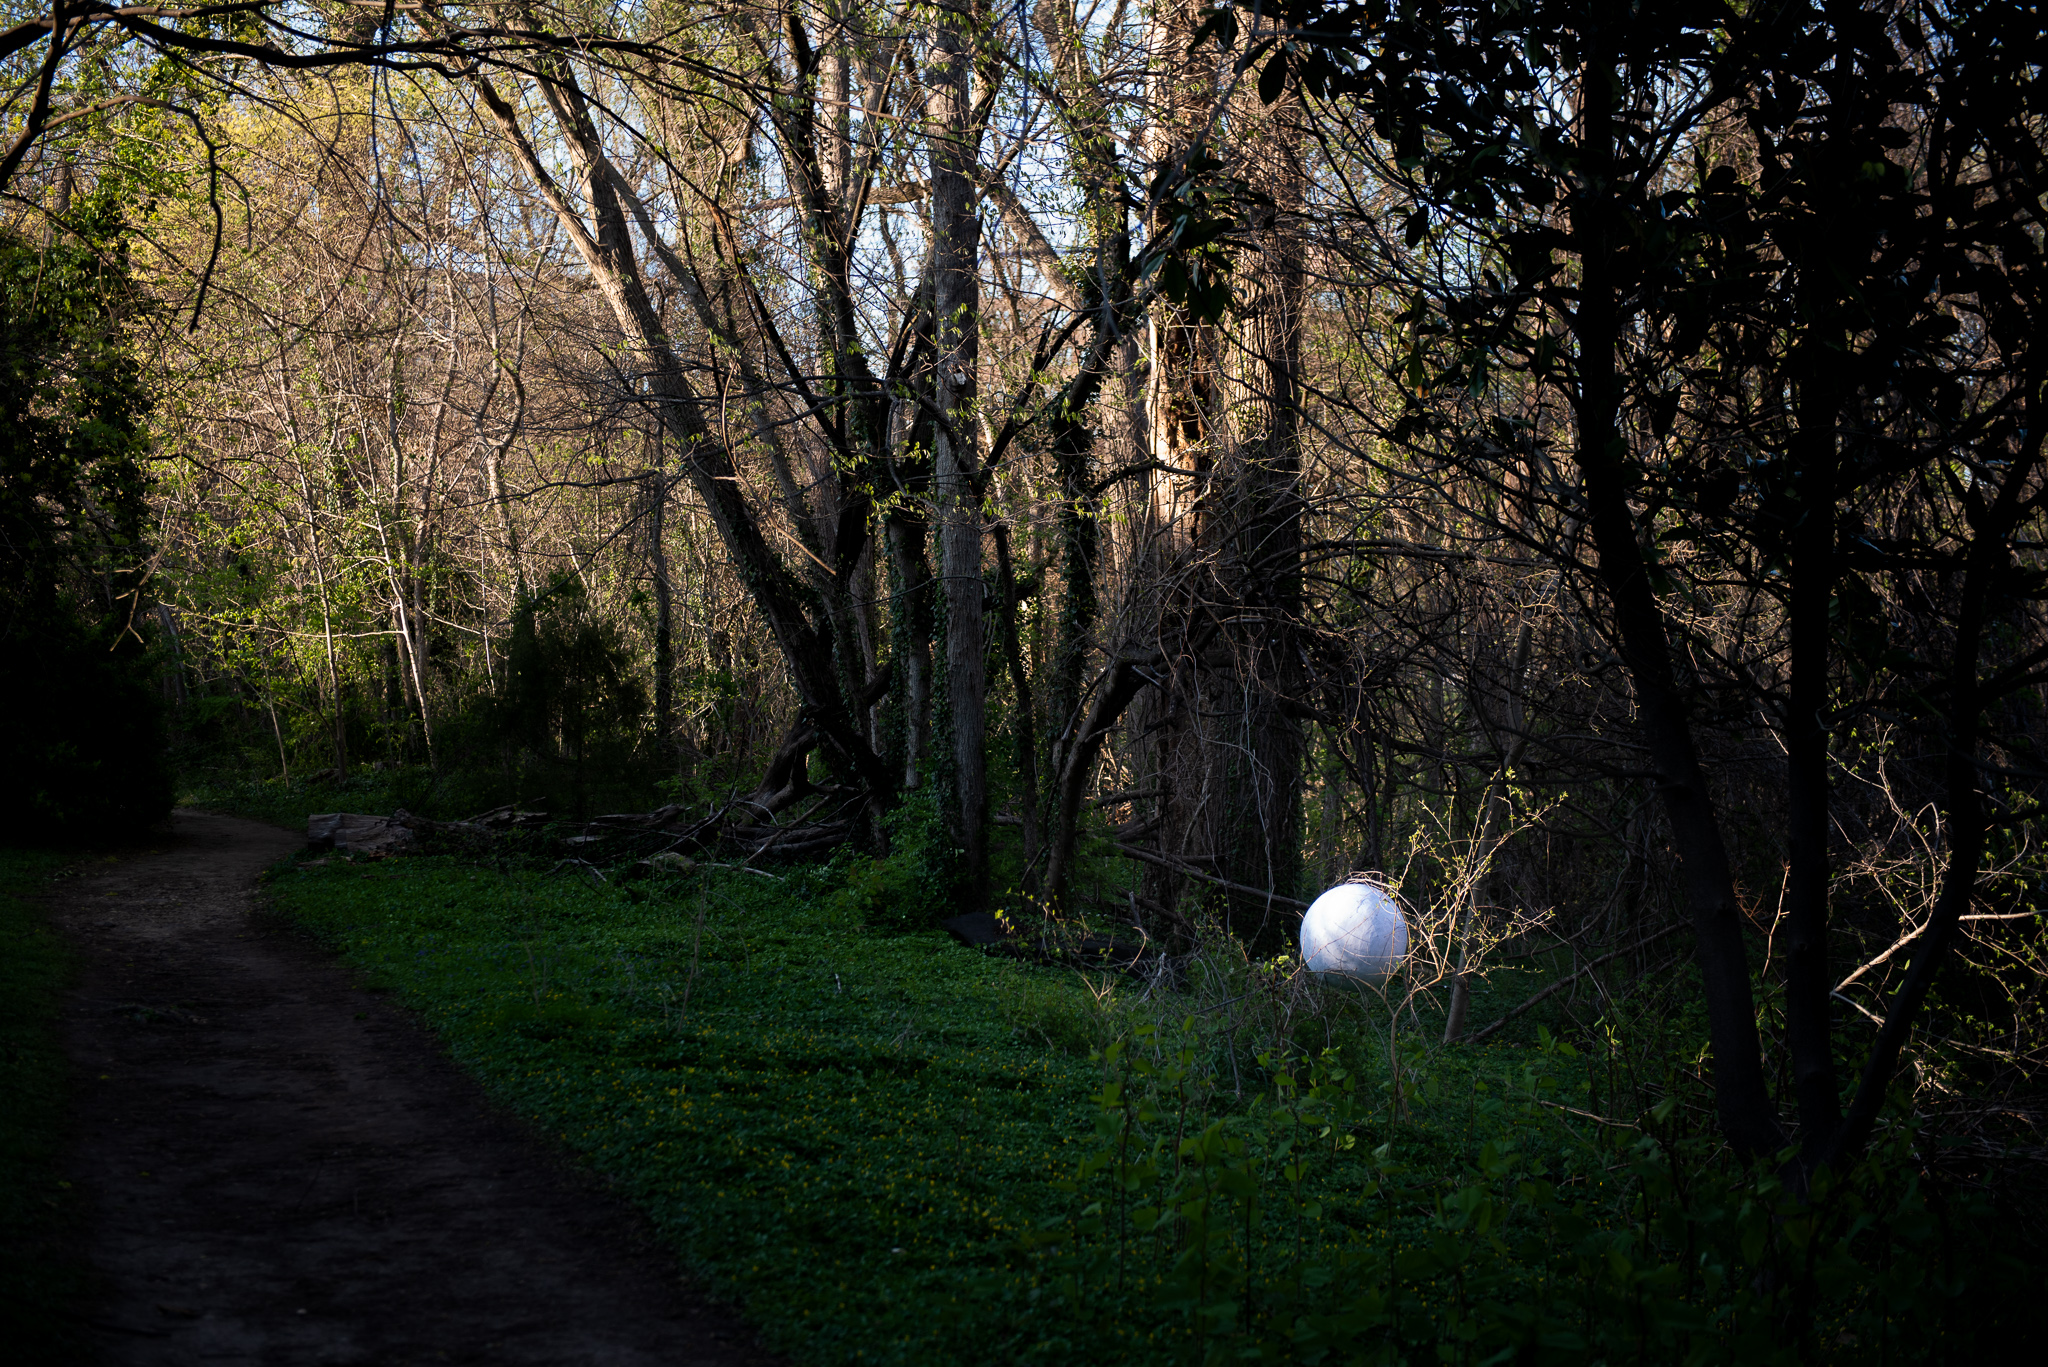 Very wide view- a white paper mache egg shape sits in a patch of sunlight, resting on the branches of a small tree.